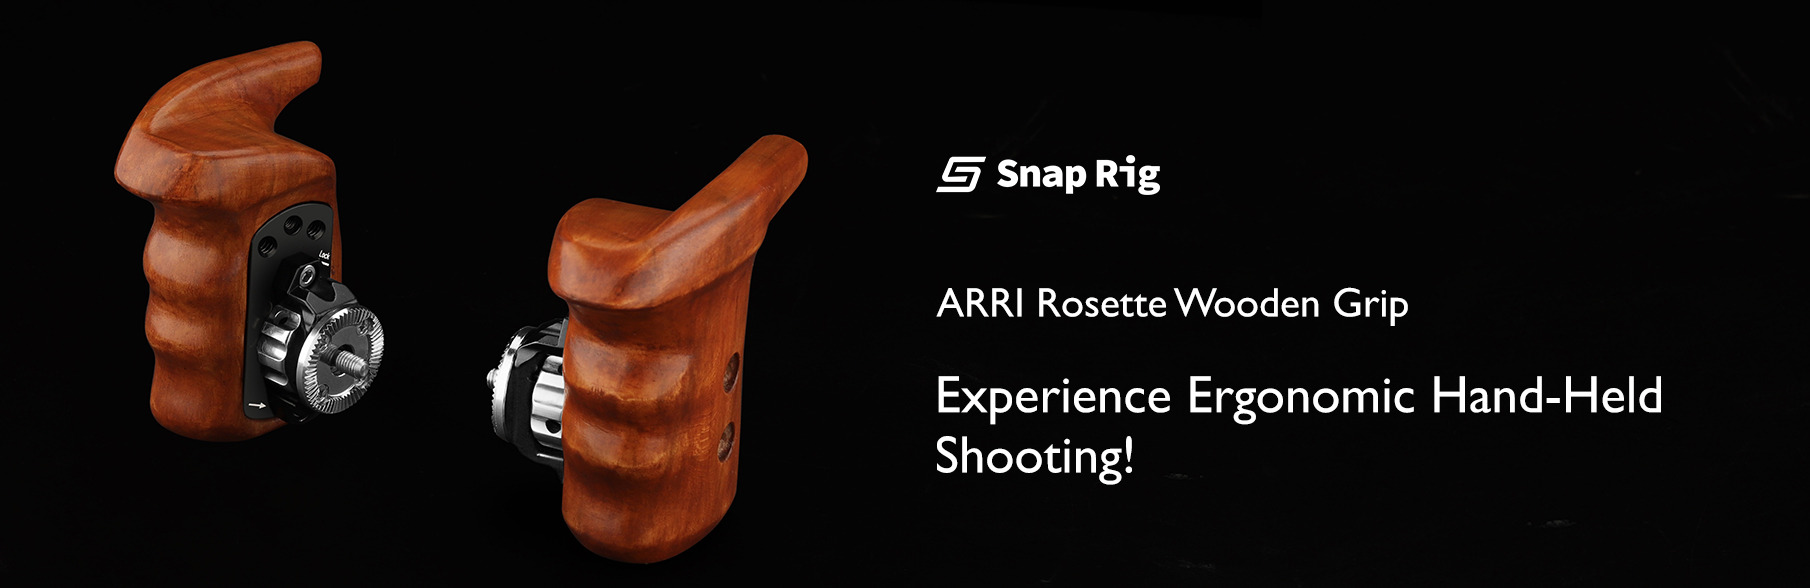 Proaim-SnapRig-Wooden-Grip-with-ARRI-Rosette-for-Camera-Cages-and-Rigs